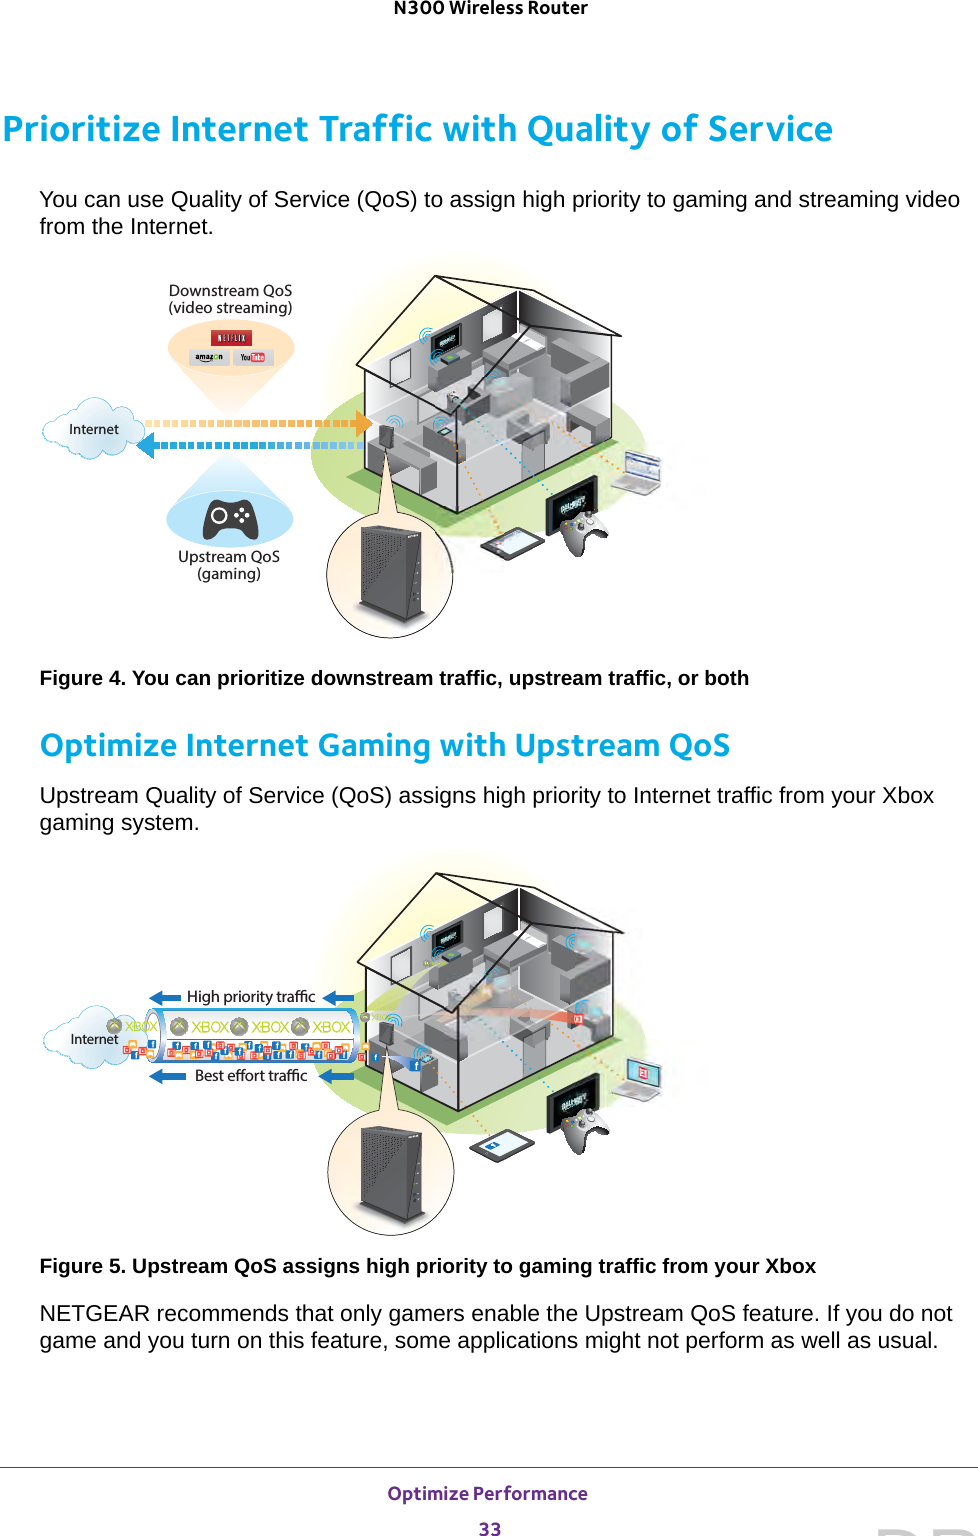 Optimize Performance 33 N300 Wireless RouterPrioritize Internet Traffic with Quality of ServiceYou can use Quality of Service (QoS) to assign high priority to gaming and streaming video from the Internet. Upstream QoS(gaming)Downstream QoS(video streaming)InternetFigure 4. You can prioritize downstream traffic, upstream traffic, or bothOptimize Internet Gaming with Upstream QoSUpstream Quality of Service (QoS) assigns high priority to Internet traffic from your Xbox gaming system.Best eort tracHigh priority tracInternetFigure 5. Upstream QoS assigns high priority to gaming traffic from your XboxNETGEAR recommends that only gamers enable the Upstream QoS feature. If you do not game and you turn on this feature, some applications might not perform as well as usual.DRAFT